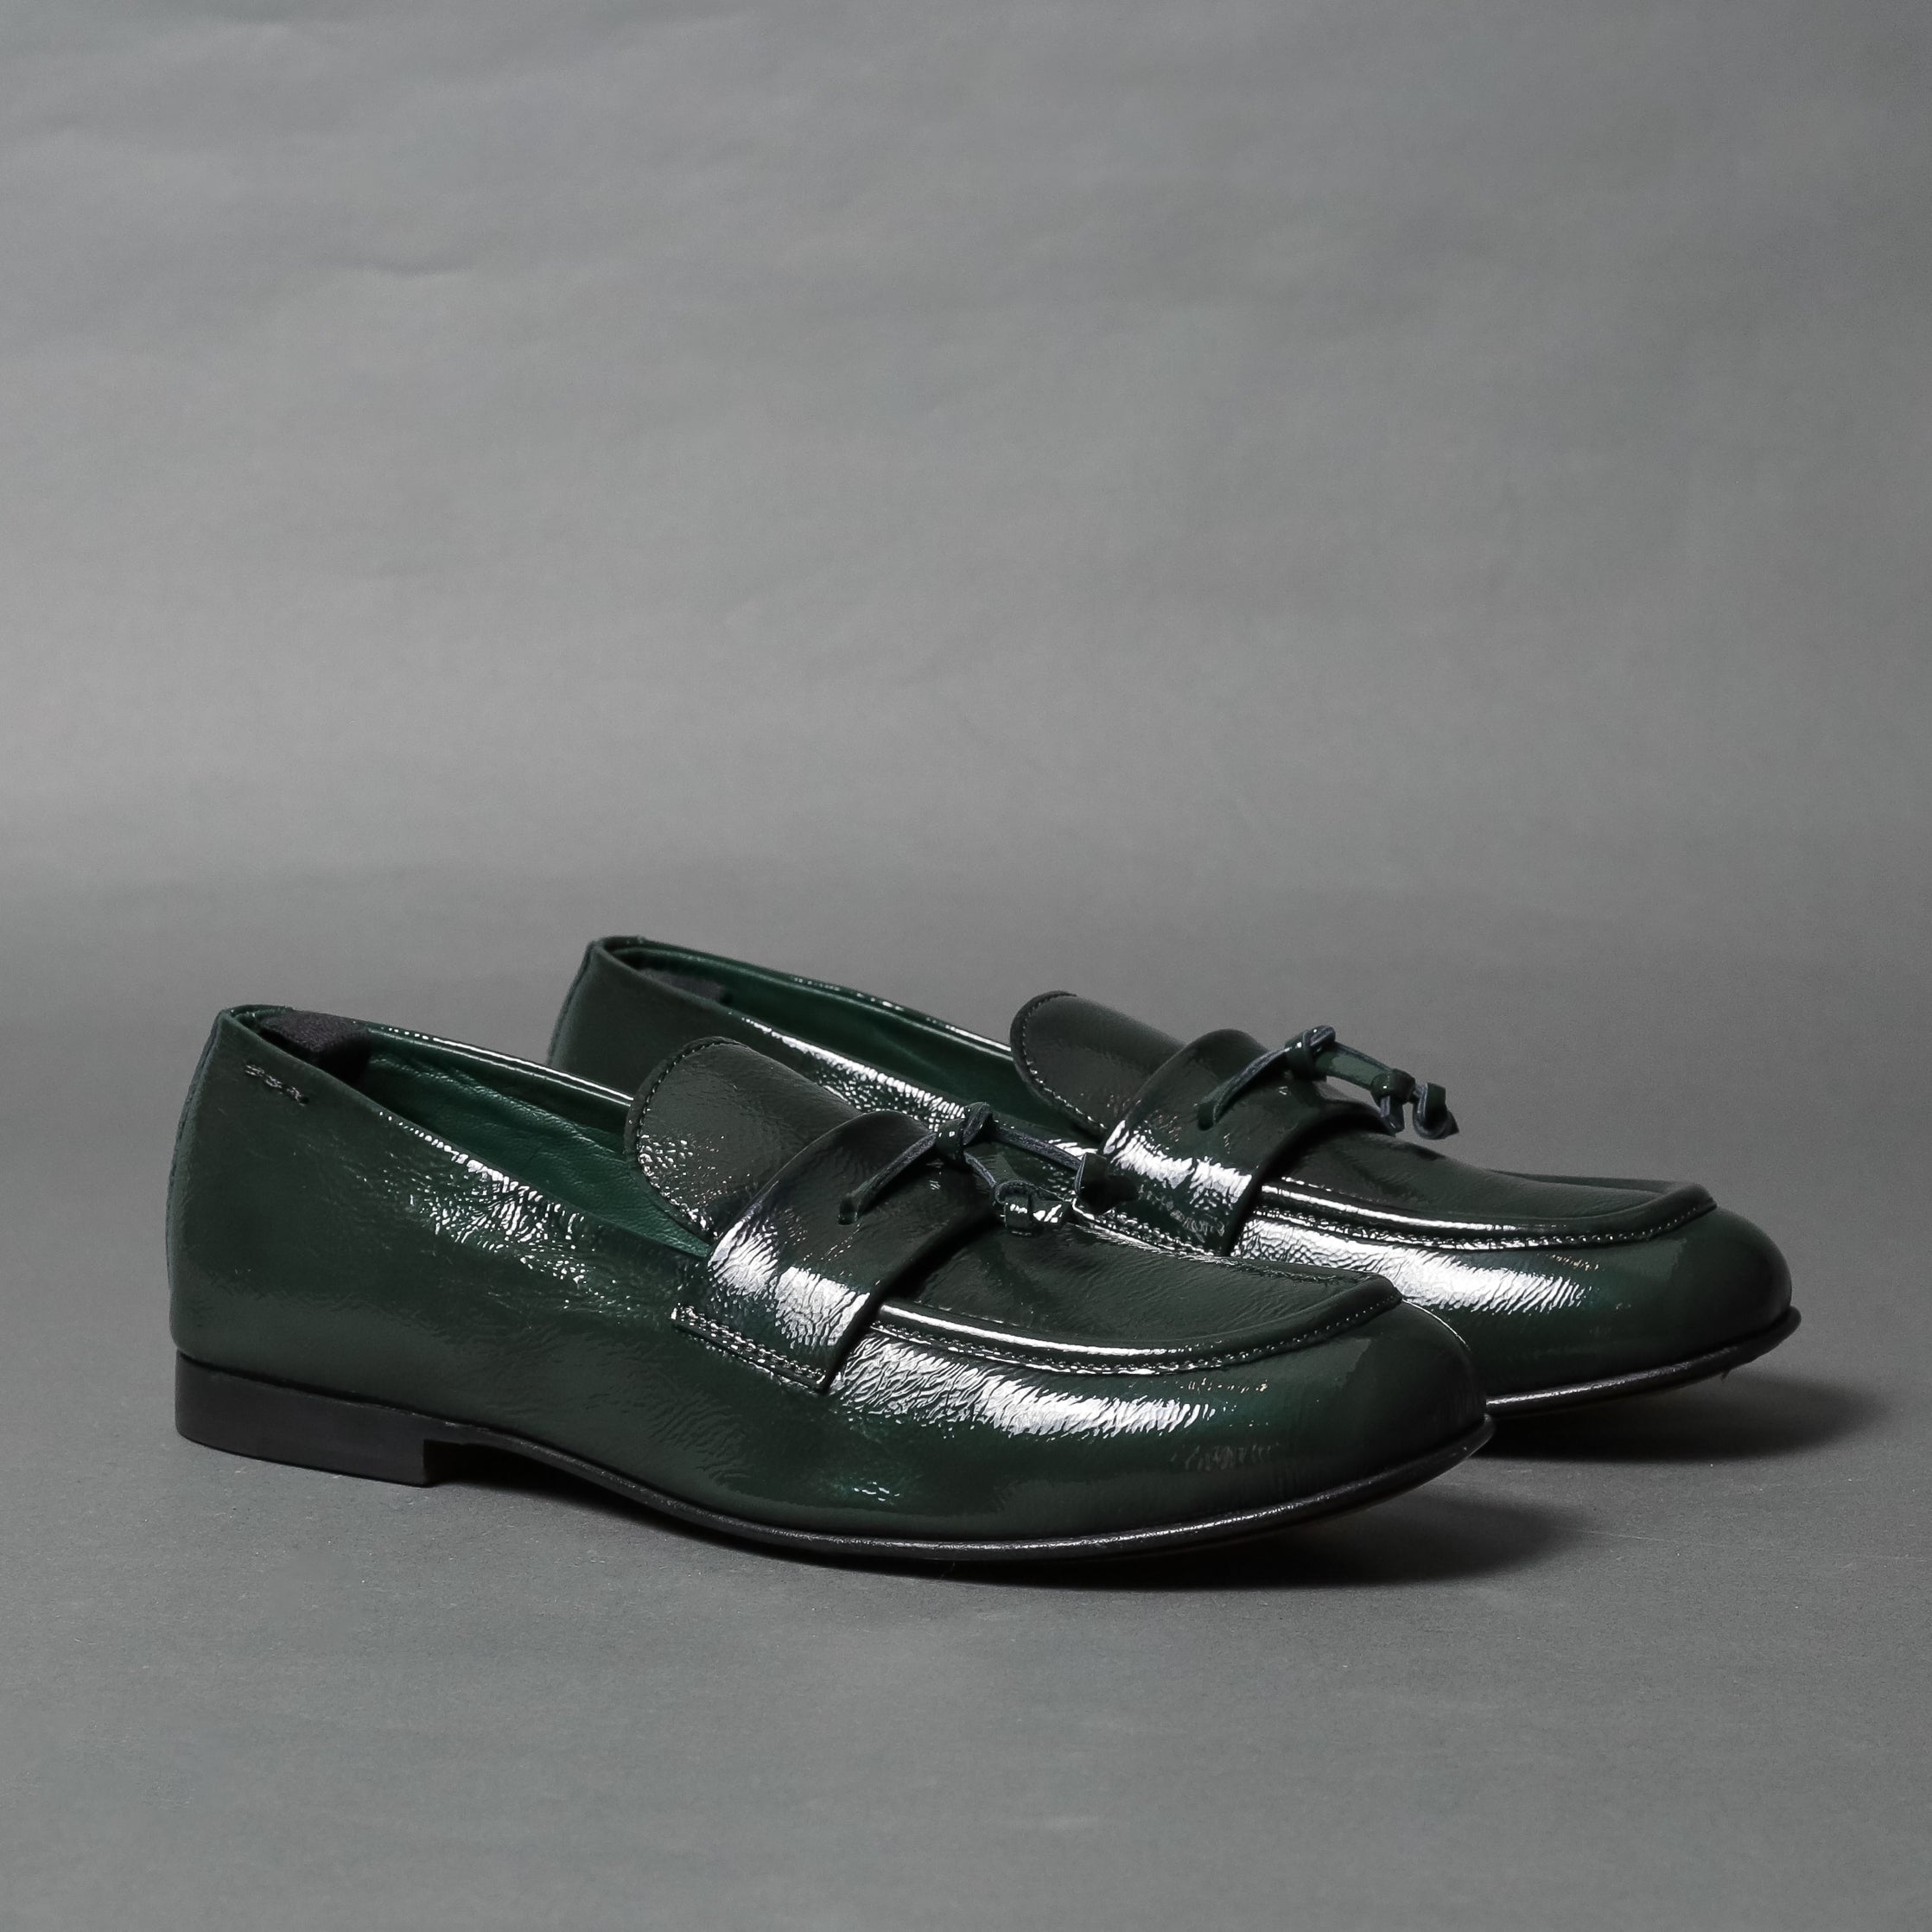 64602 Green - 124 Shoes